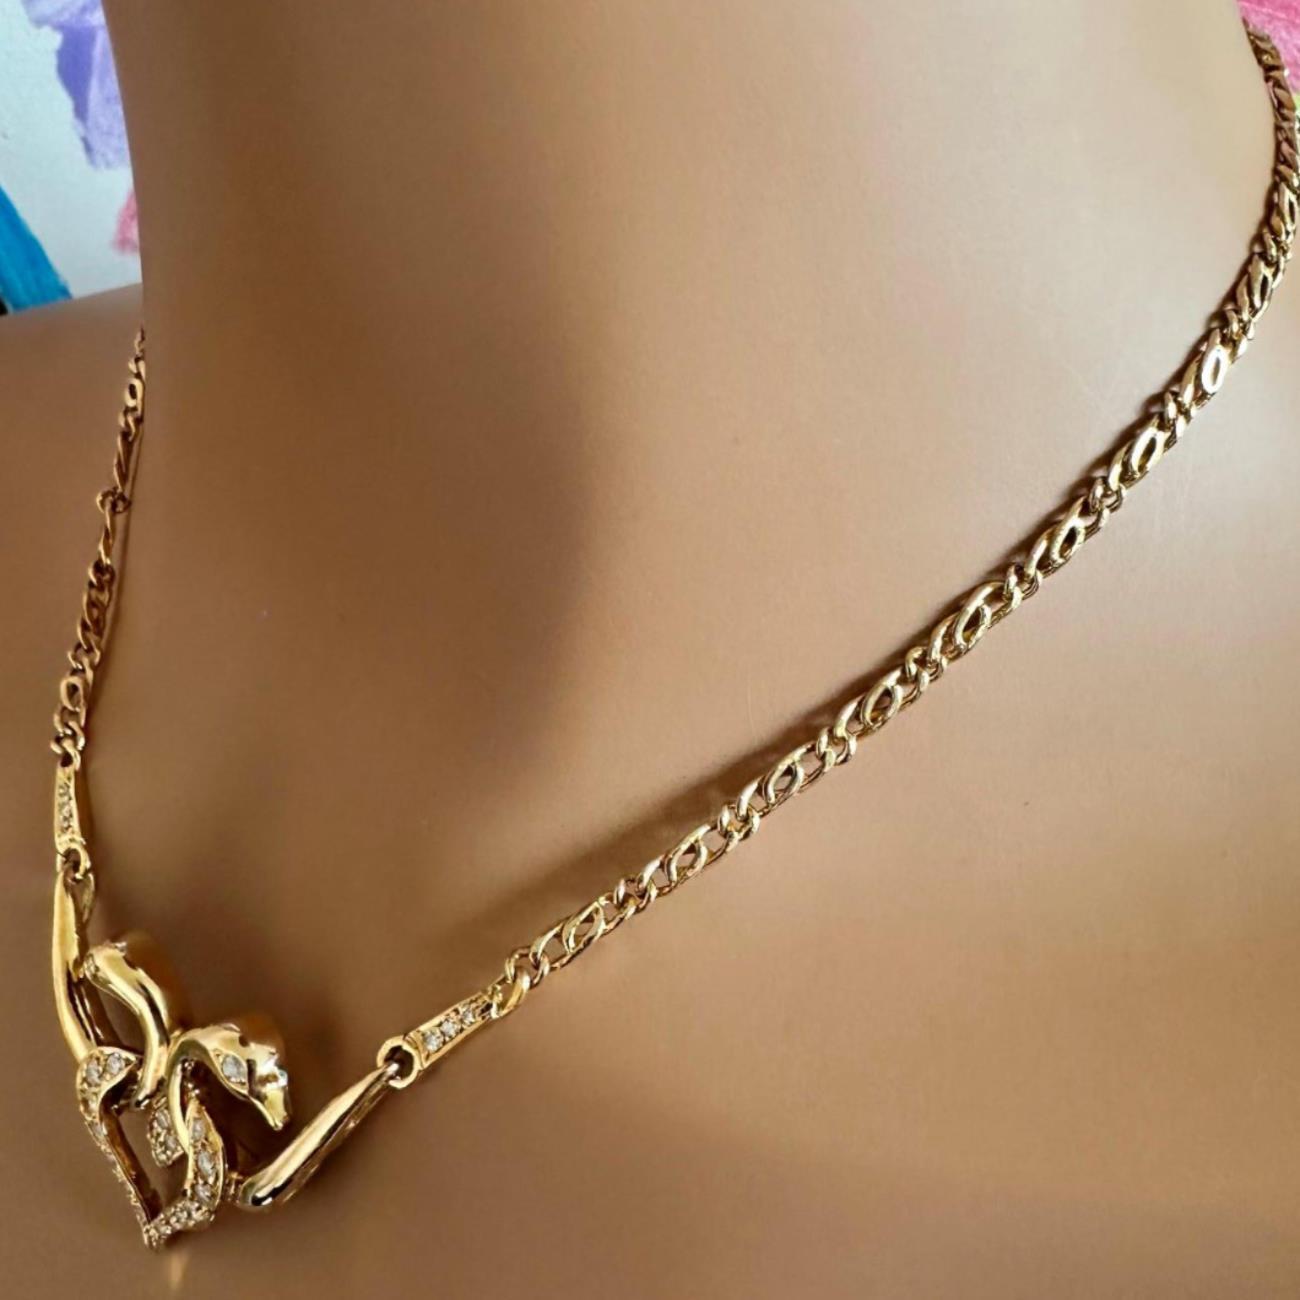 Lalaounis Jewelry & Watches:Vintage & Antique Jewelry:Necklaces & Pendants Ilias Lalaounis 18k Yellow Gold Diamond Greek Double Swan Heart Necklace